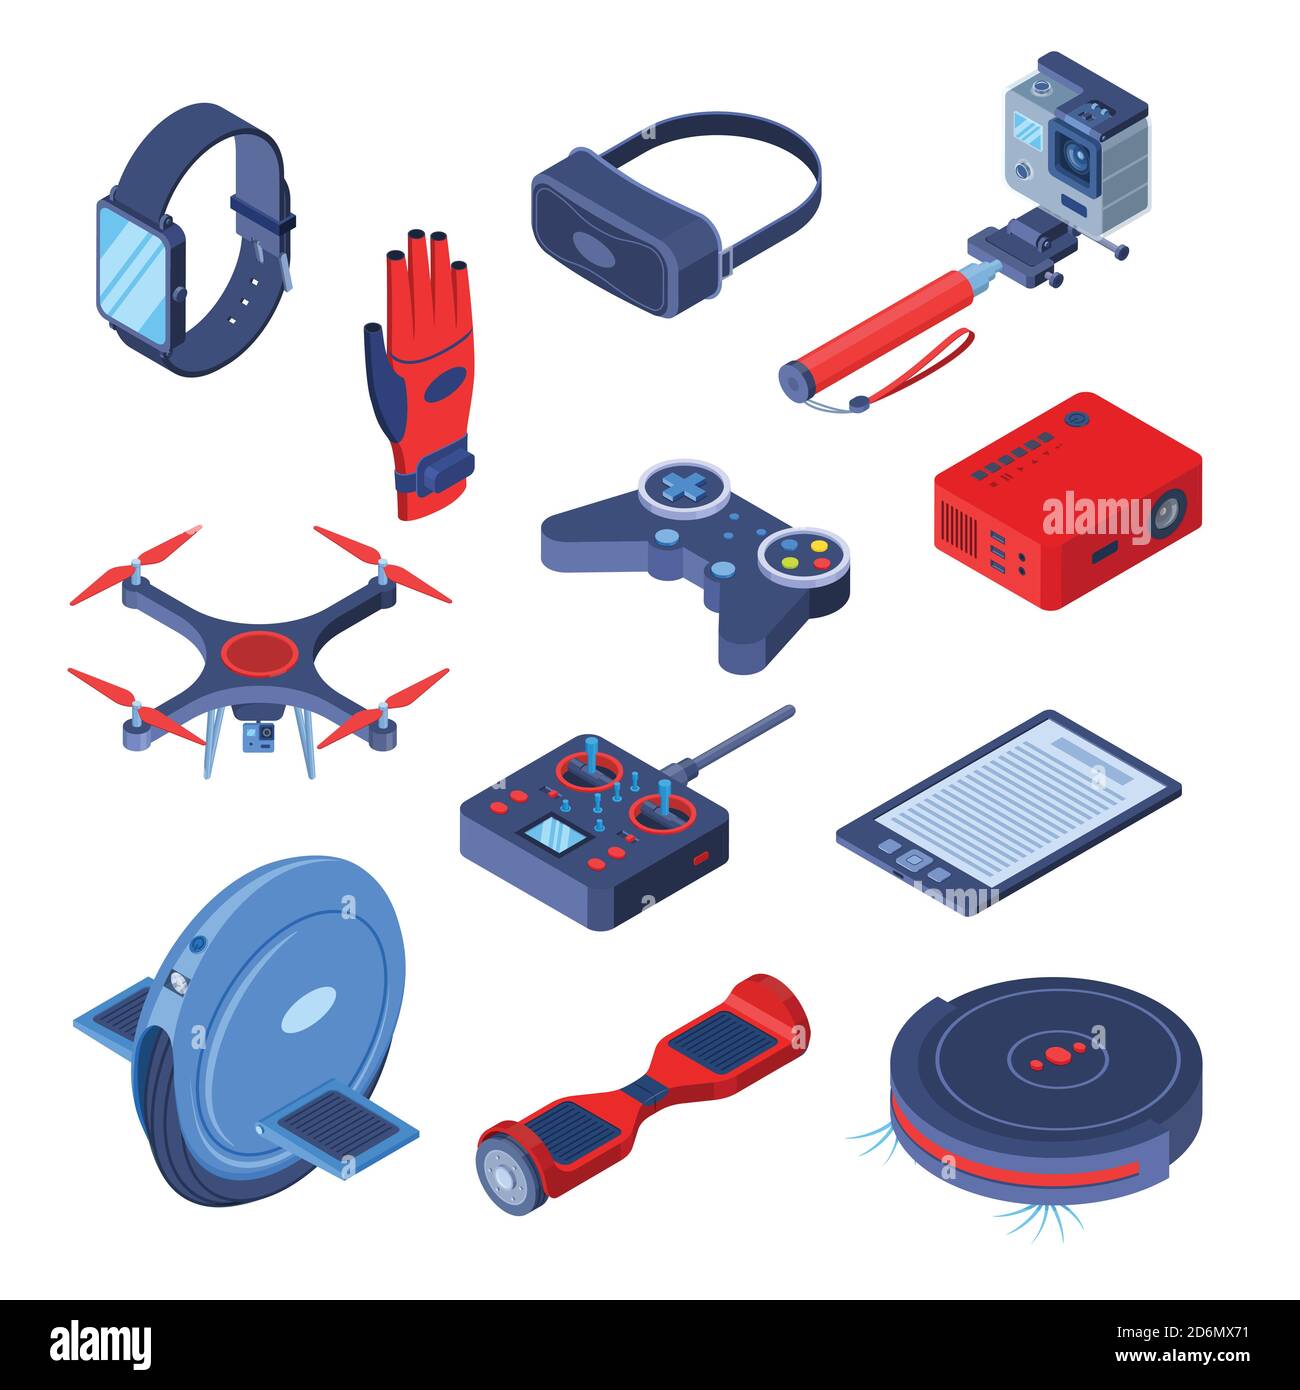 Modern gadgets and devices vector 3d isometric icons and design elements set. Virtual reality, robots, smart future technologies concept. Stock Vector